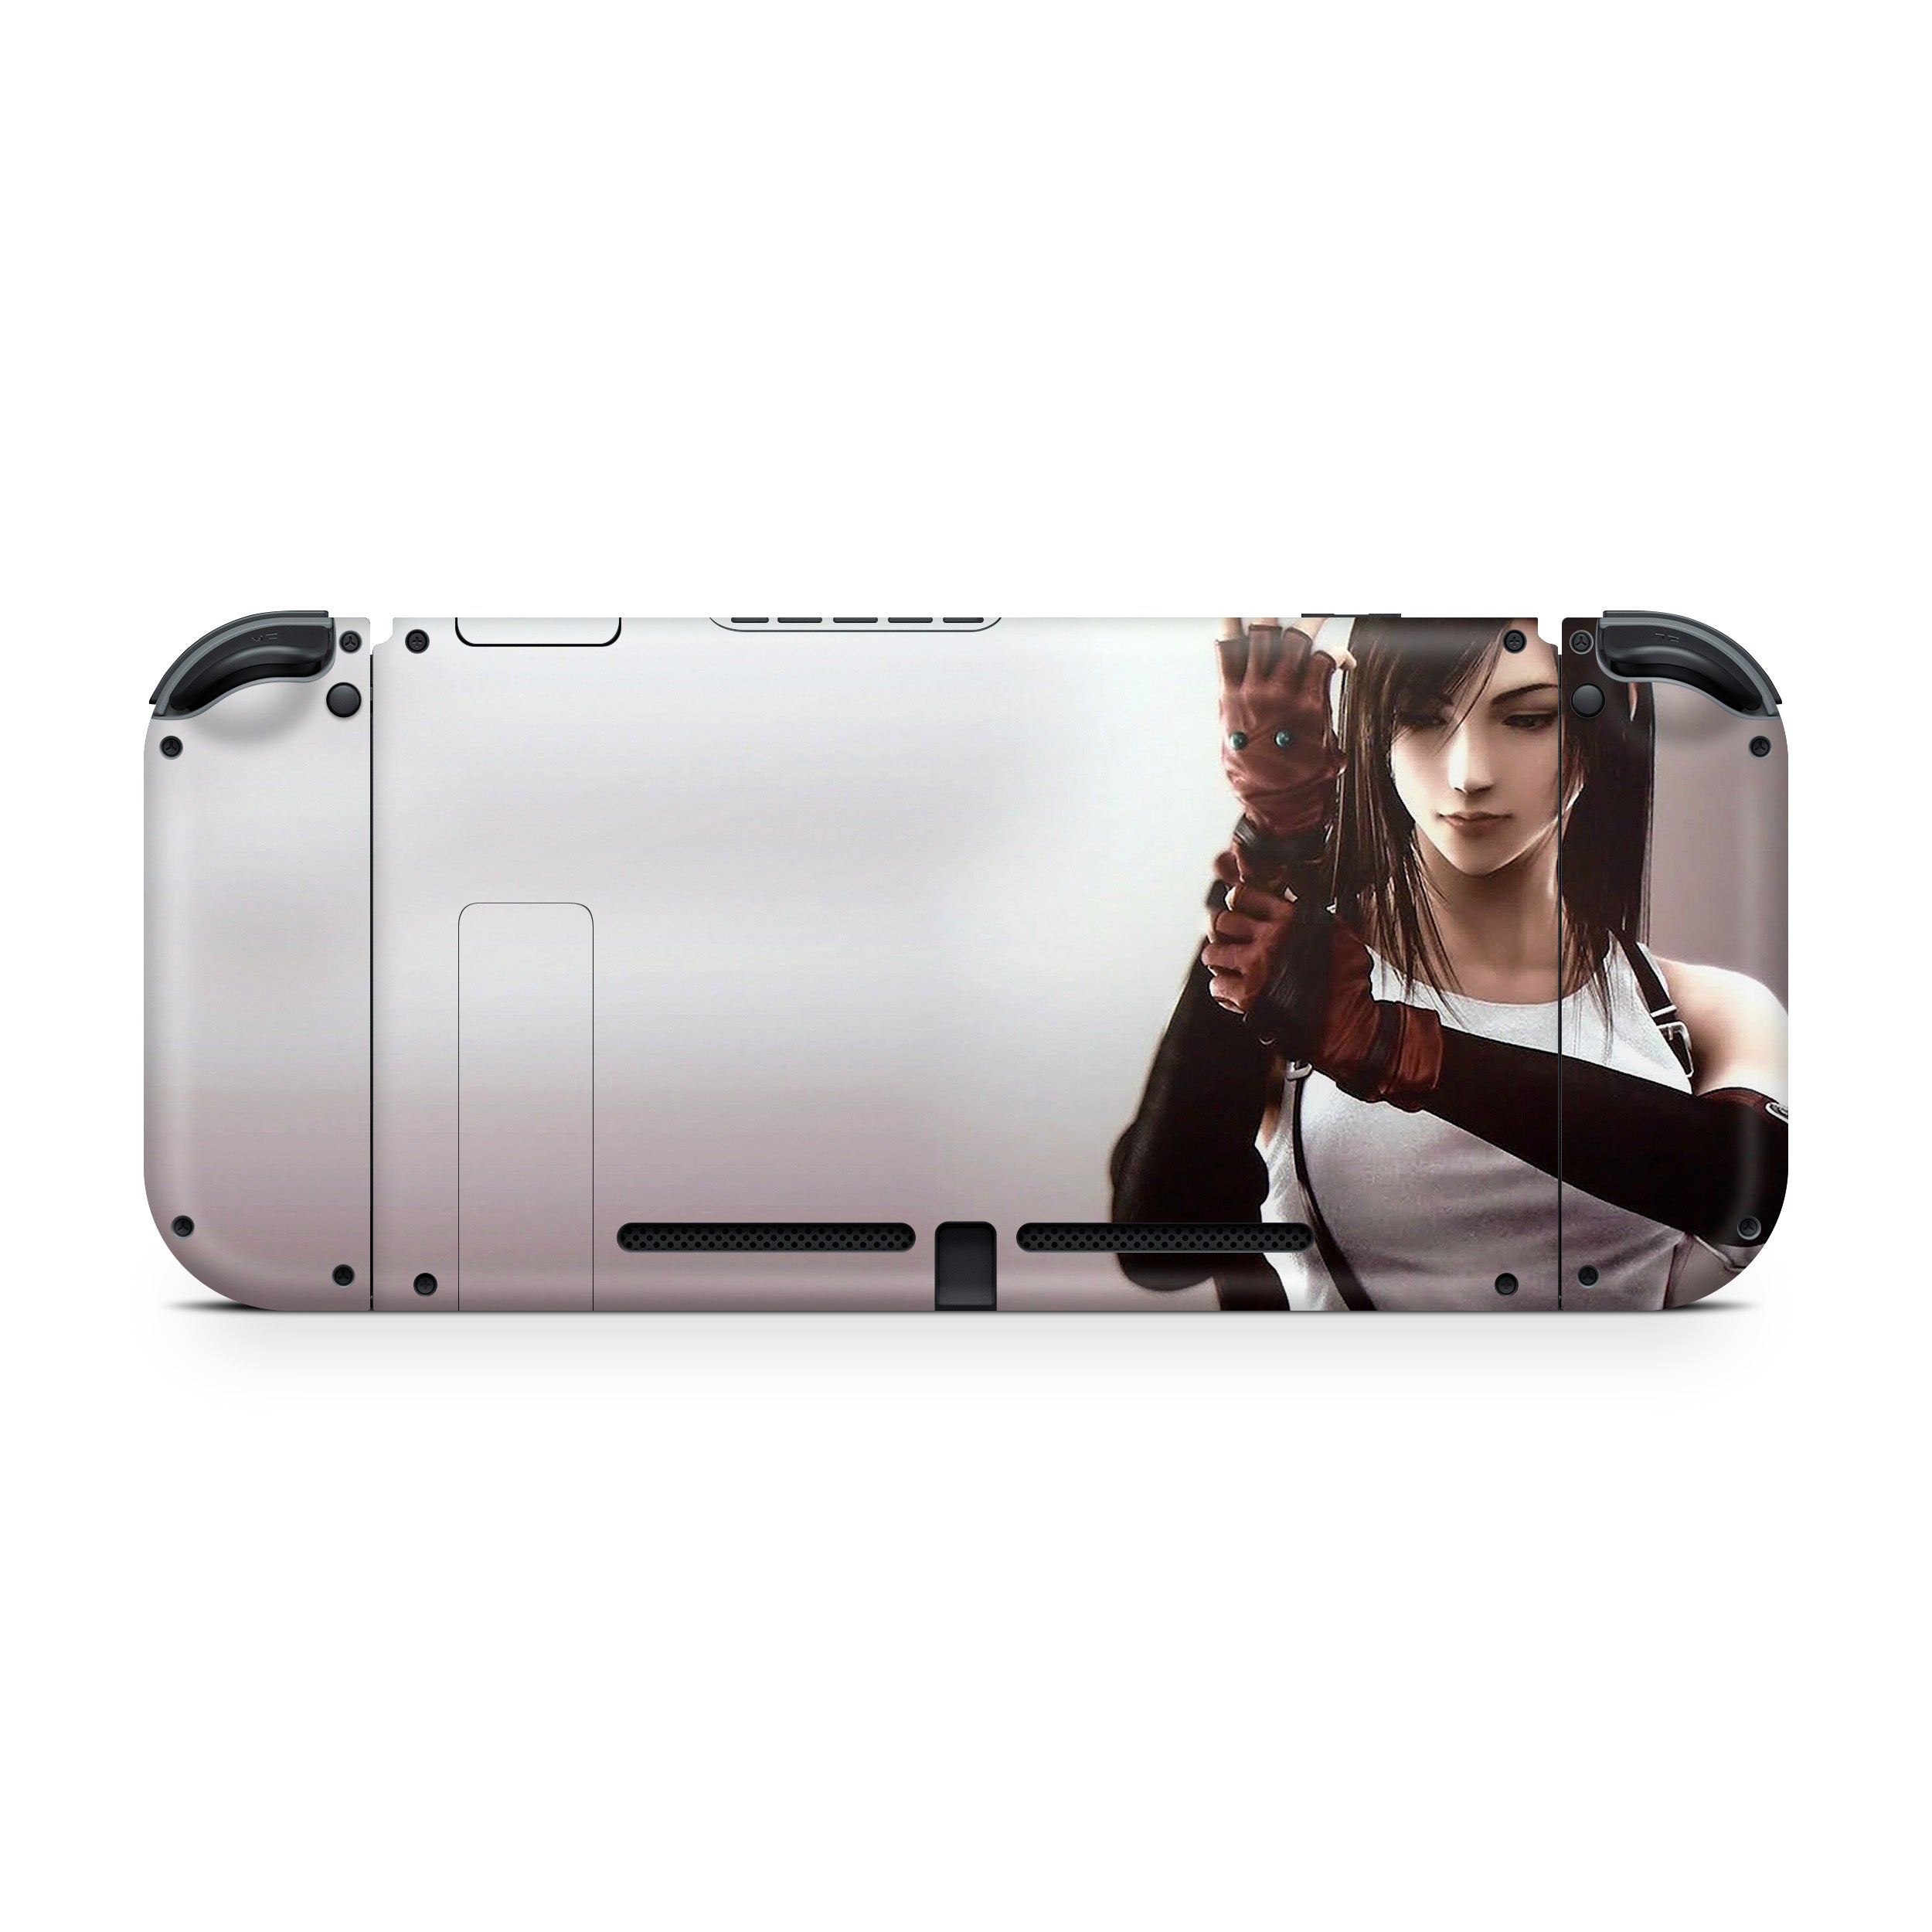 A video game skin featuring a Final Fantasy 7 Tifa design for the Nintendo Switch.